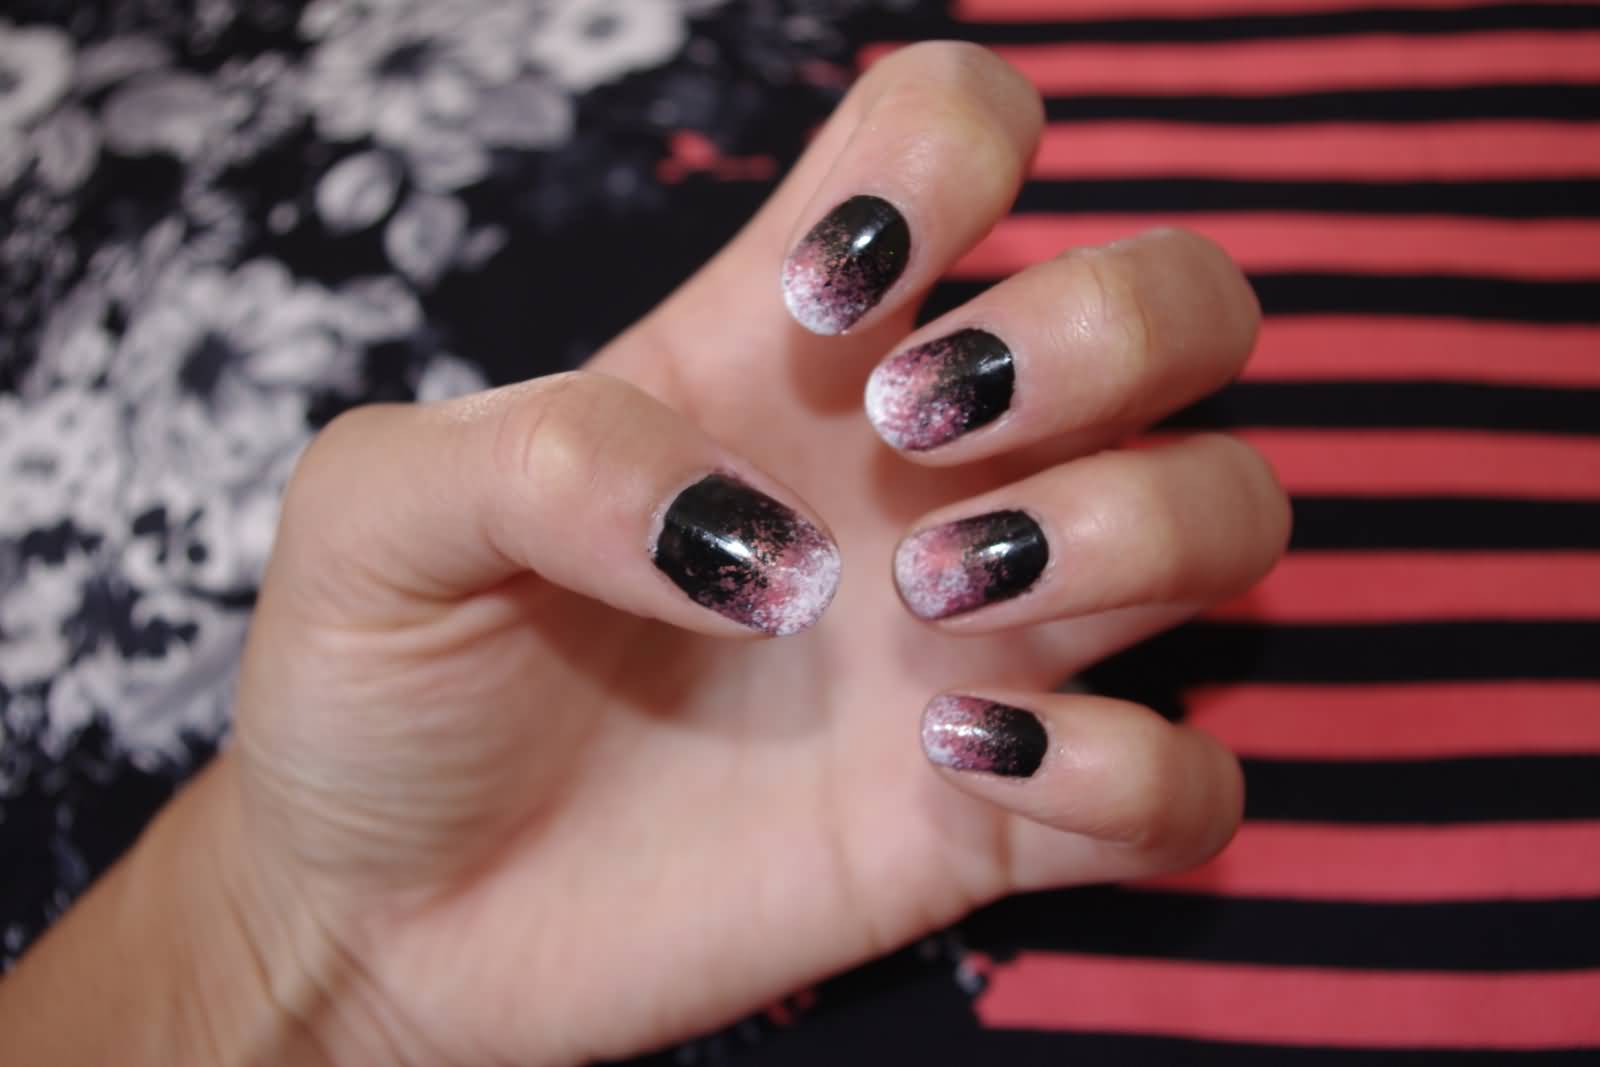 10. Black and Ombre Nail Art Designs - wide 10